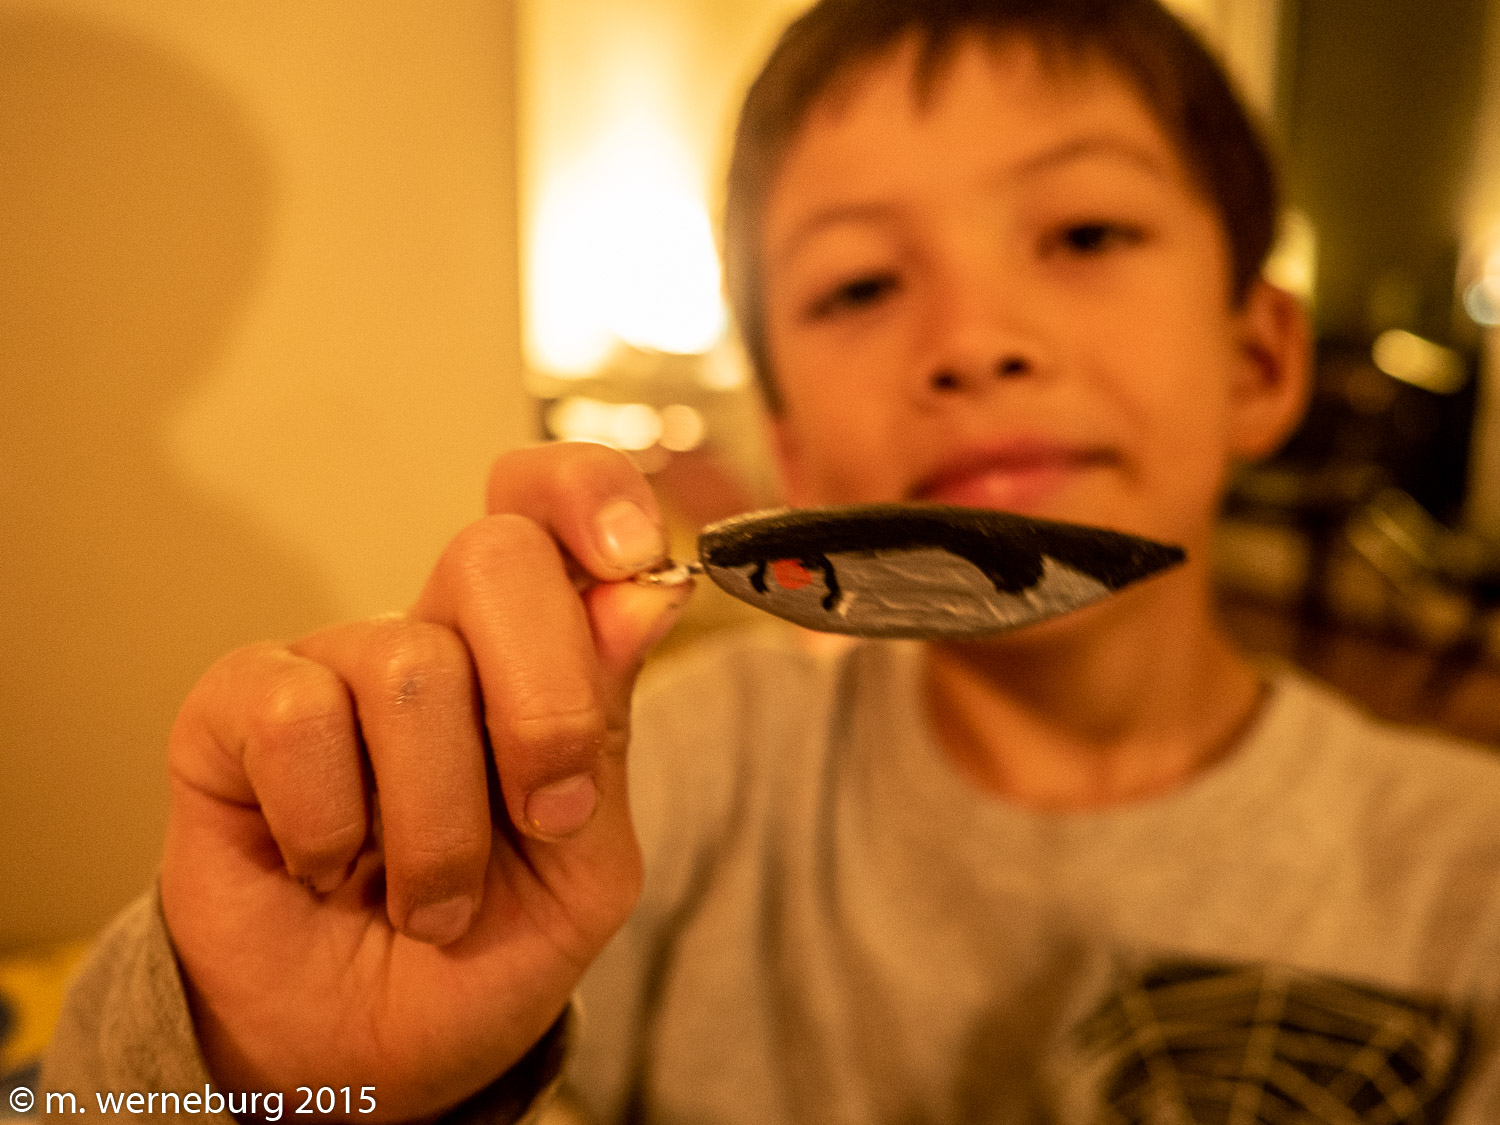 the boy's home-made lure